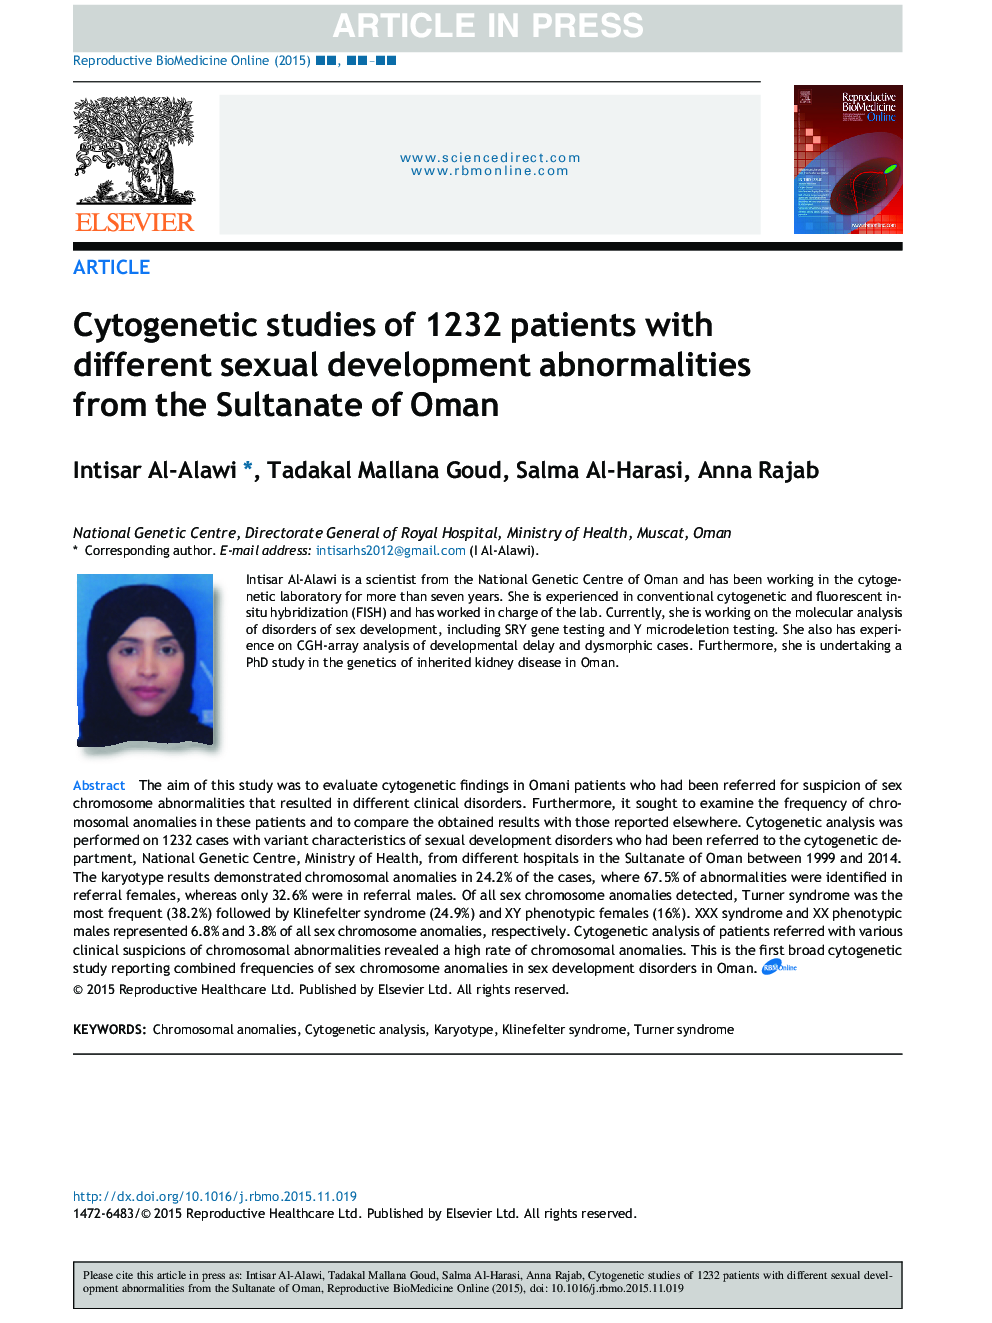 Cytogenetic studies of 1232 patients with different sexual development abnormalities from the Sultanate of Oman